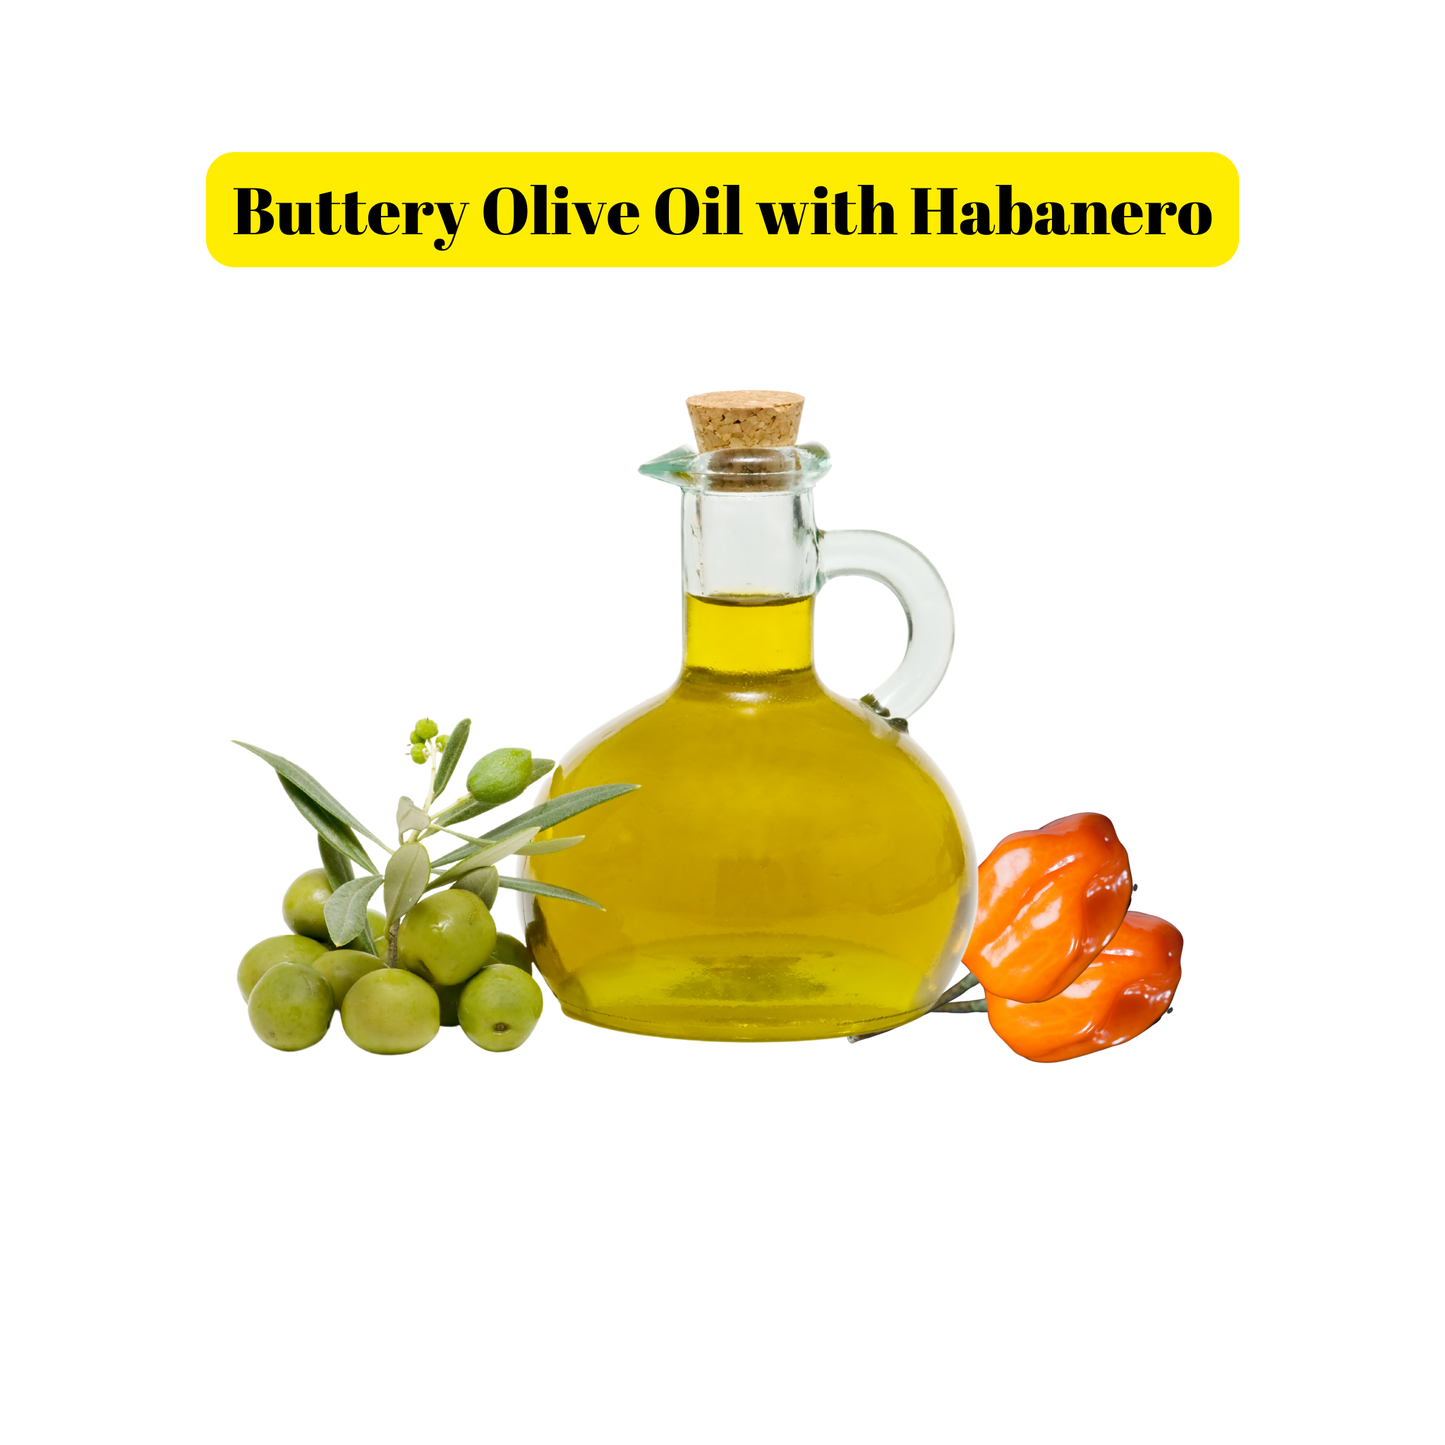 Buttery Olive Oil with Habanero Salt